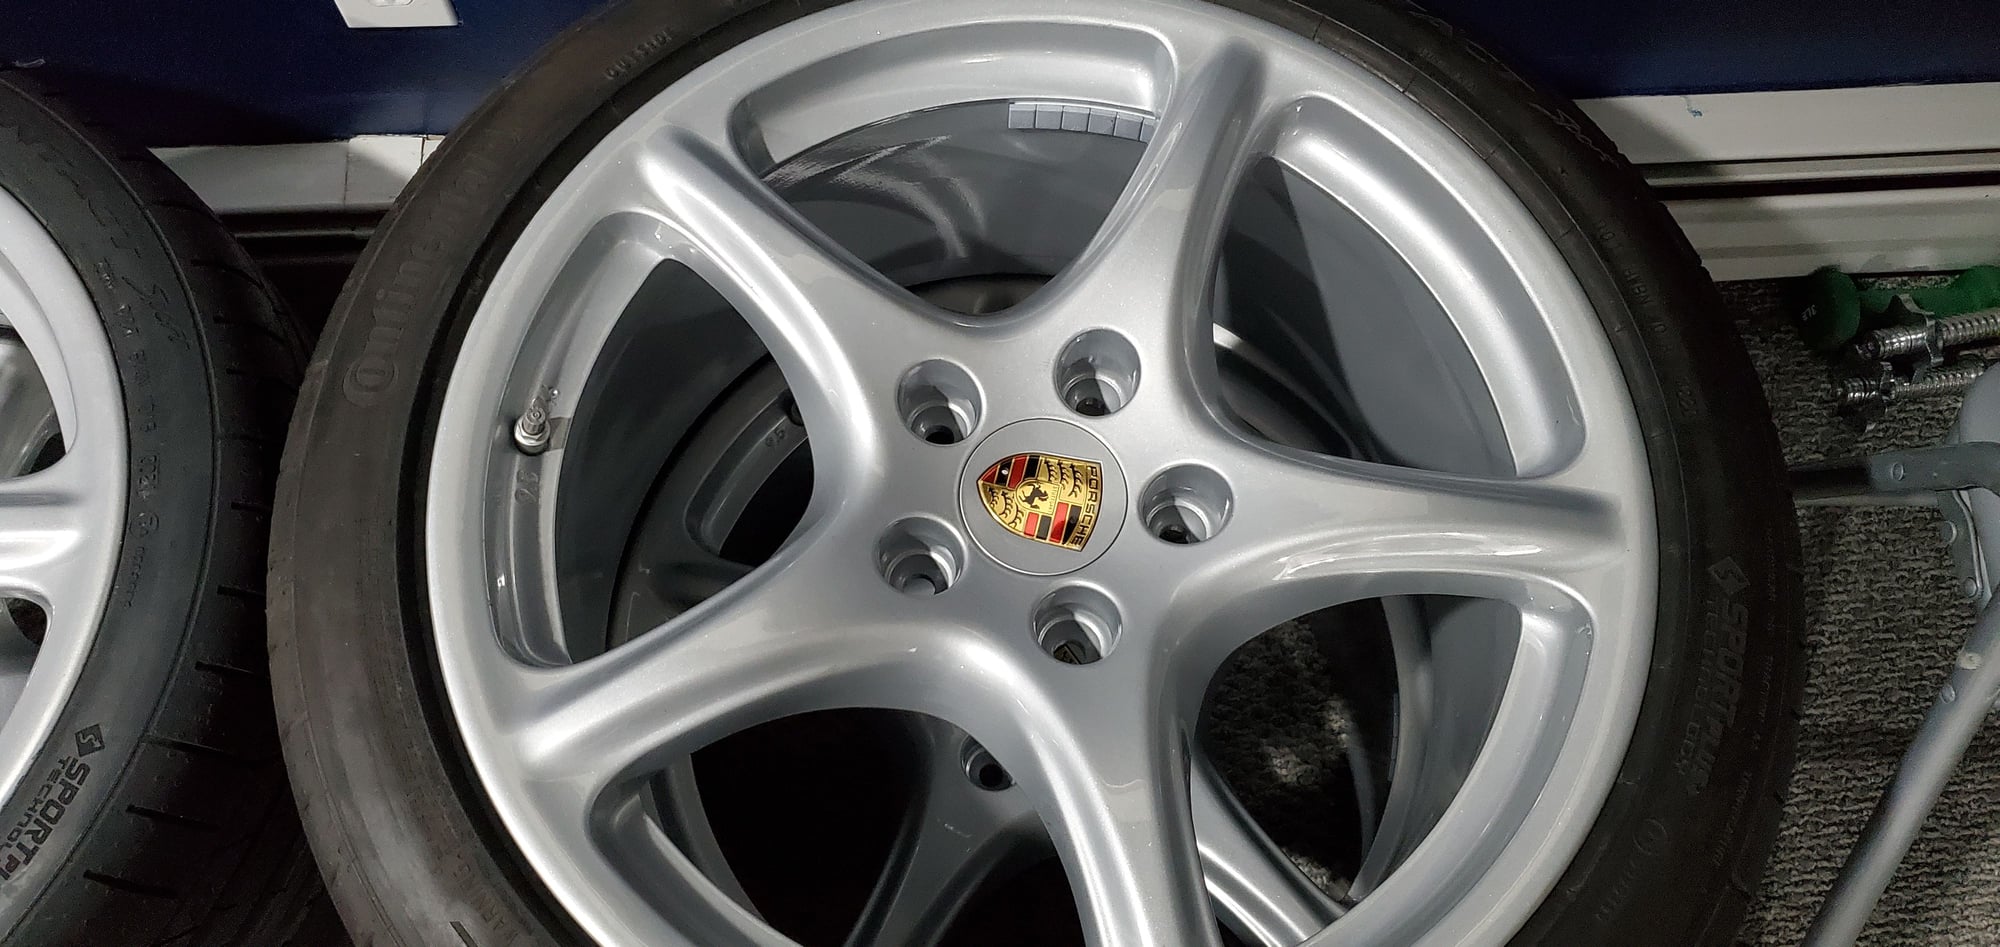 Wheels and Tires/Axles - Cayman 987 Carrera Classics with tires - Used - 0  All Models - Bellmore, NY 11710, United States